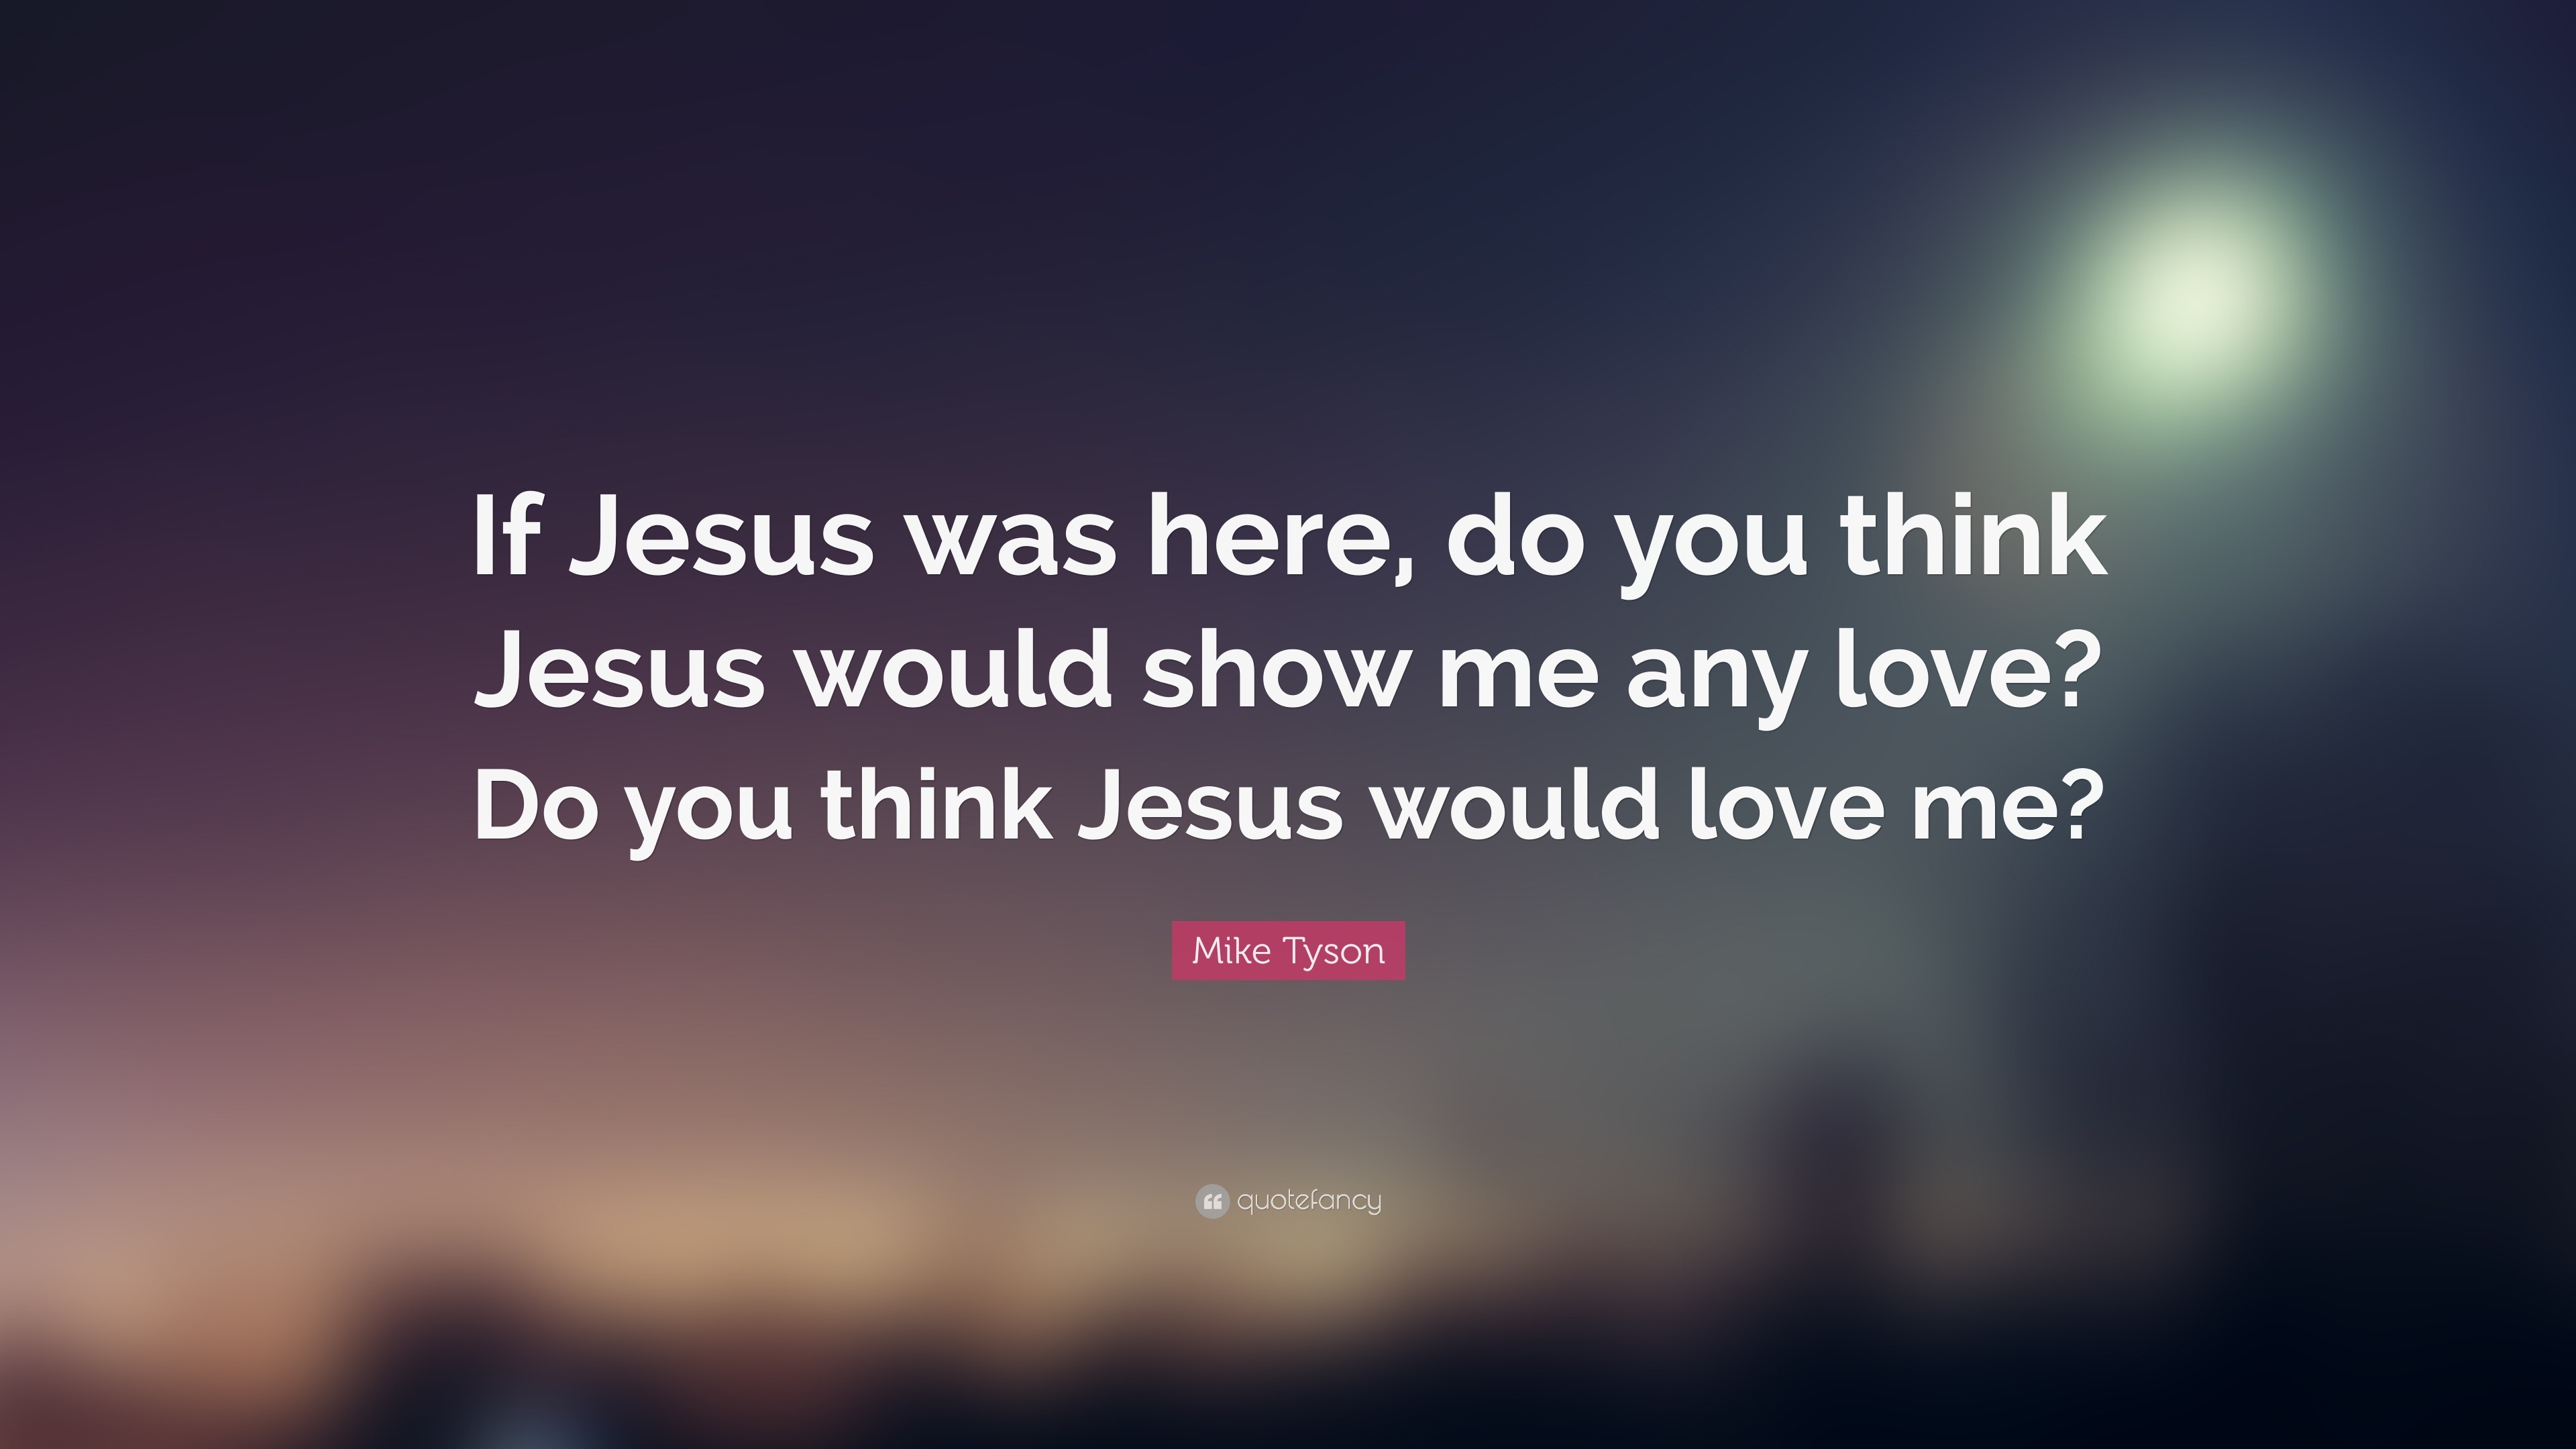 Mike Tyson Quote “If Jesus was here do you think Jesus would show